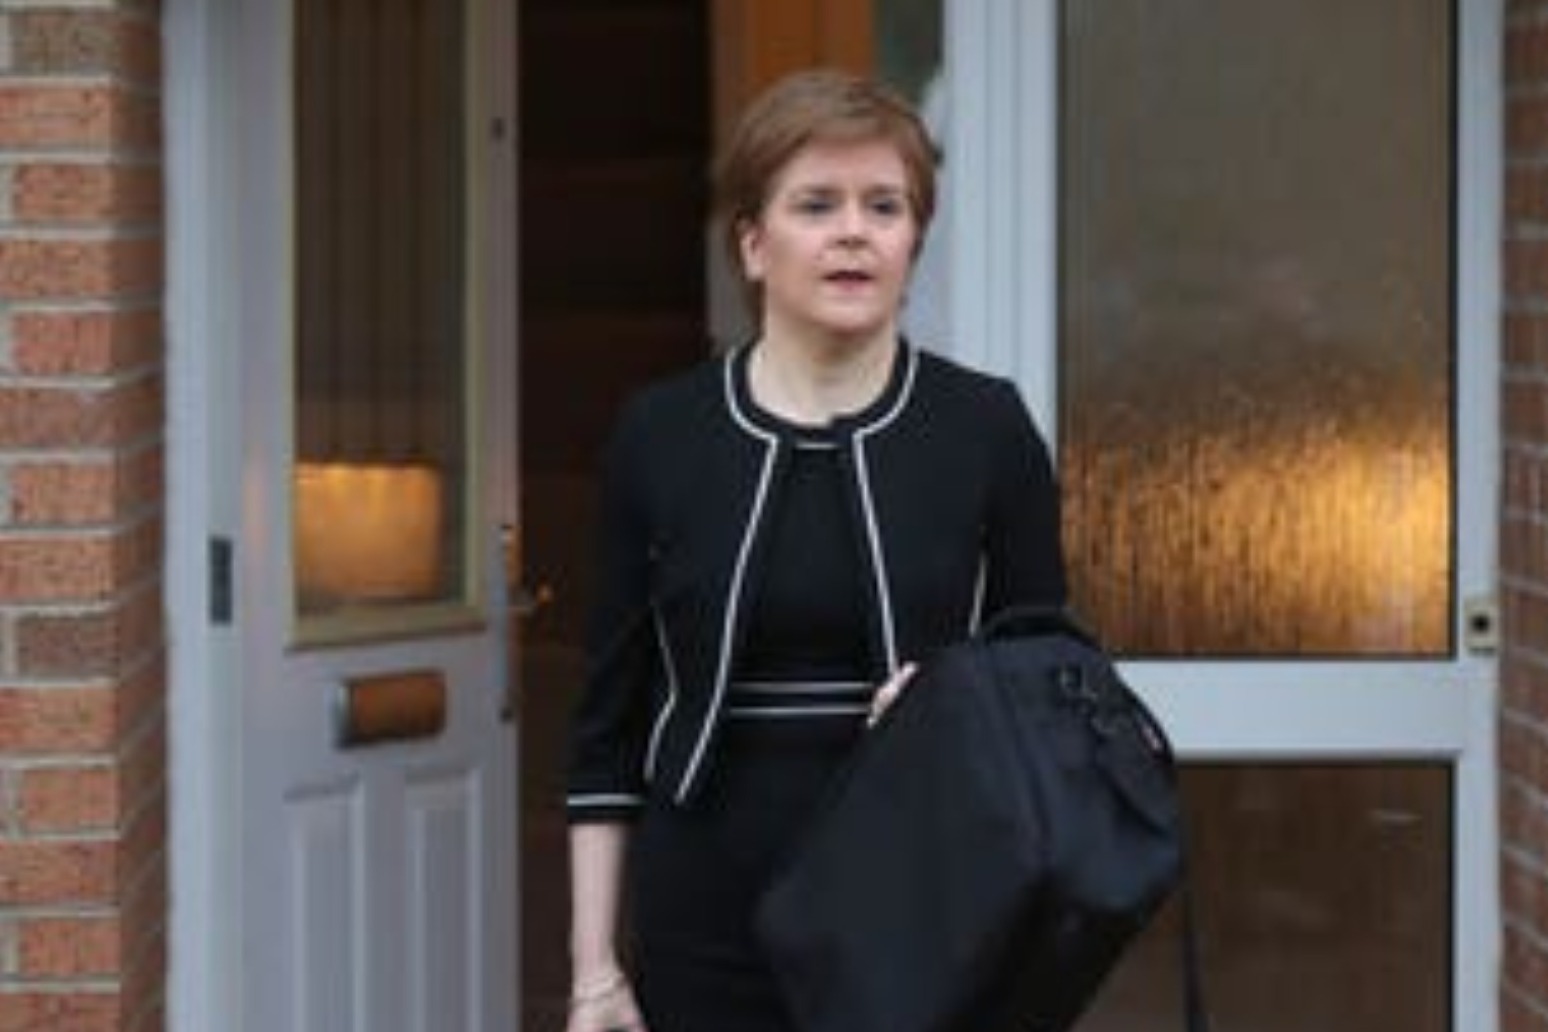 Sturgeon misled Holyrood committee over Salmond investigation, report finds 